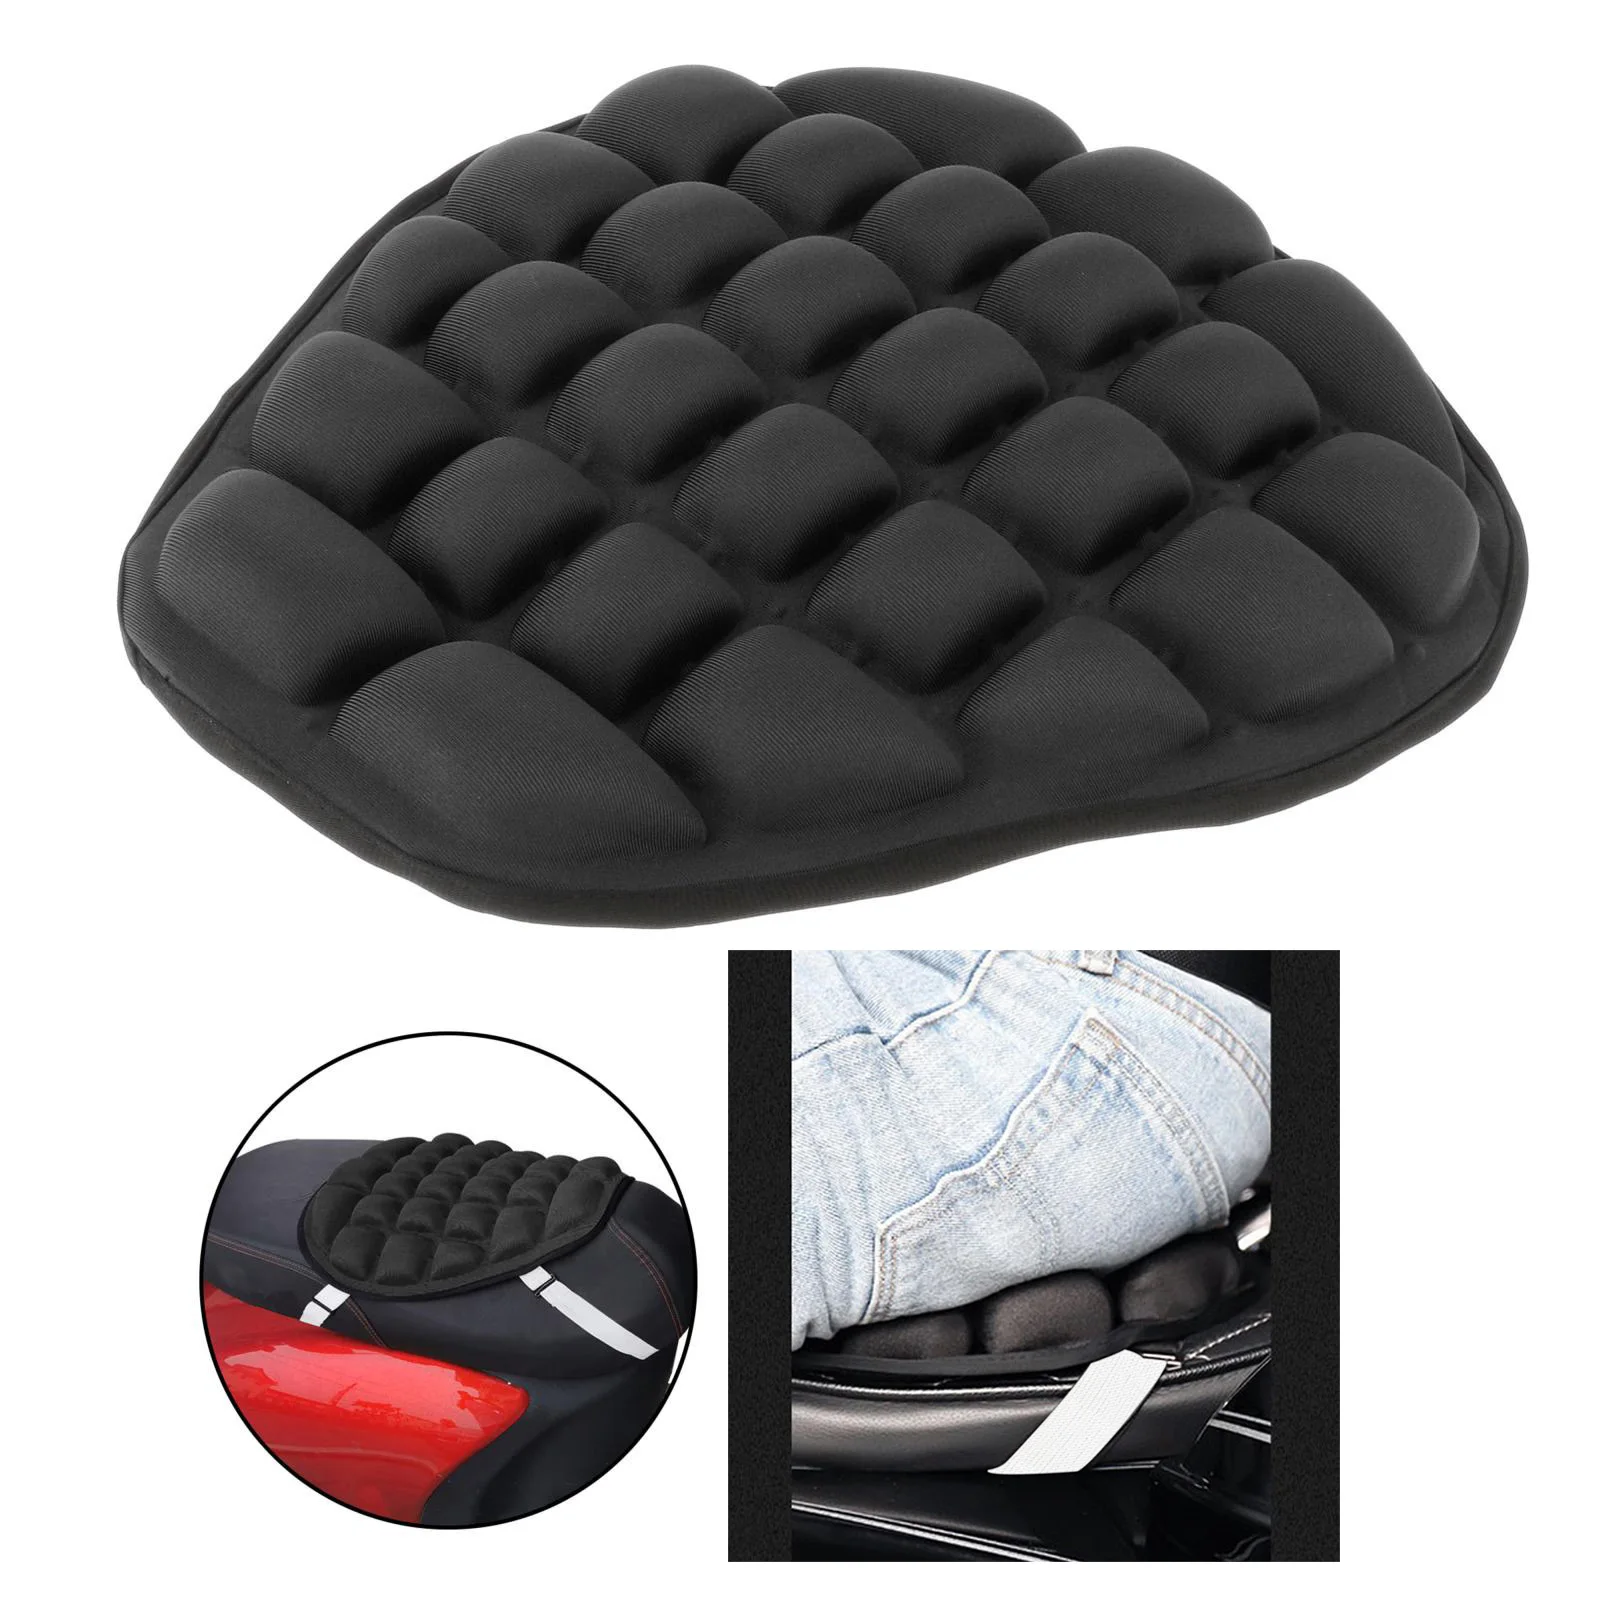 Comfortable Pillion Cushion HXZB Non-Slip Air Motorcycle Seat Cushion Pressure Relief Ride Seat Pad for Passenger Rear Back Rider